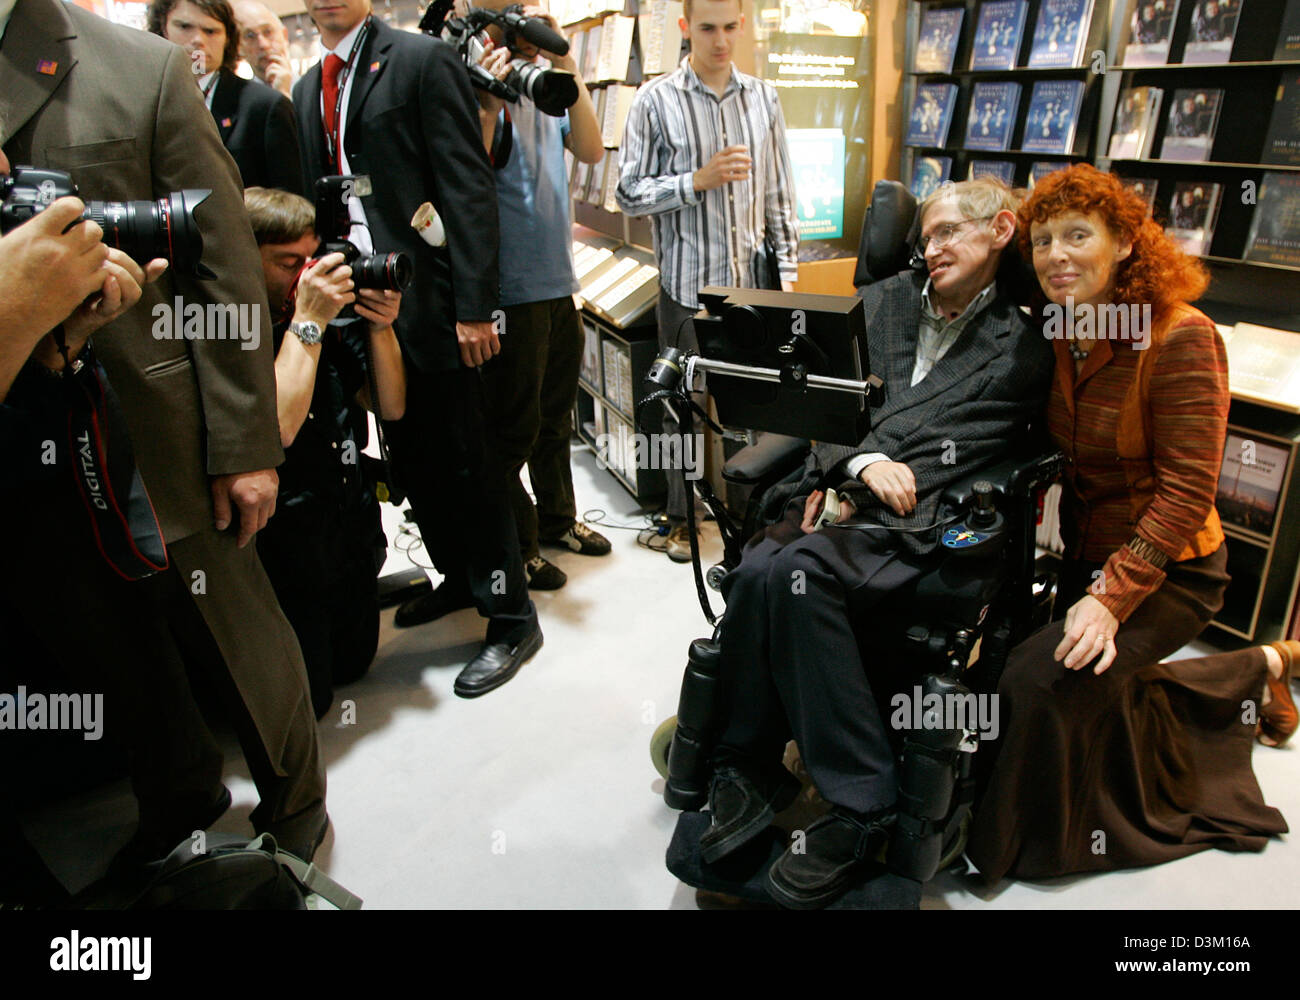 (dpa) - Famous handicapped physicist Stephen Hawking (2nd from R) and his wife Elaine (R) smile on the opening day of the Frankfurt Book Fair 2005 in Frankfurt Main, Germany, Wednesday 19 October 2005. More than 7.000 publishers from all over the world exhibit their latest books as well as classics of literature. The fair's organisers expect several hundred thousand visitors at the Stock Photo